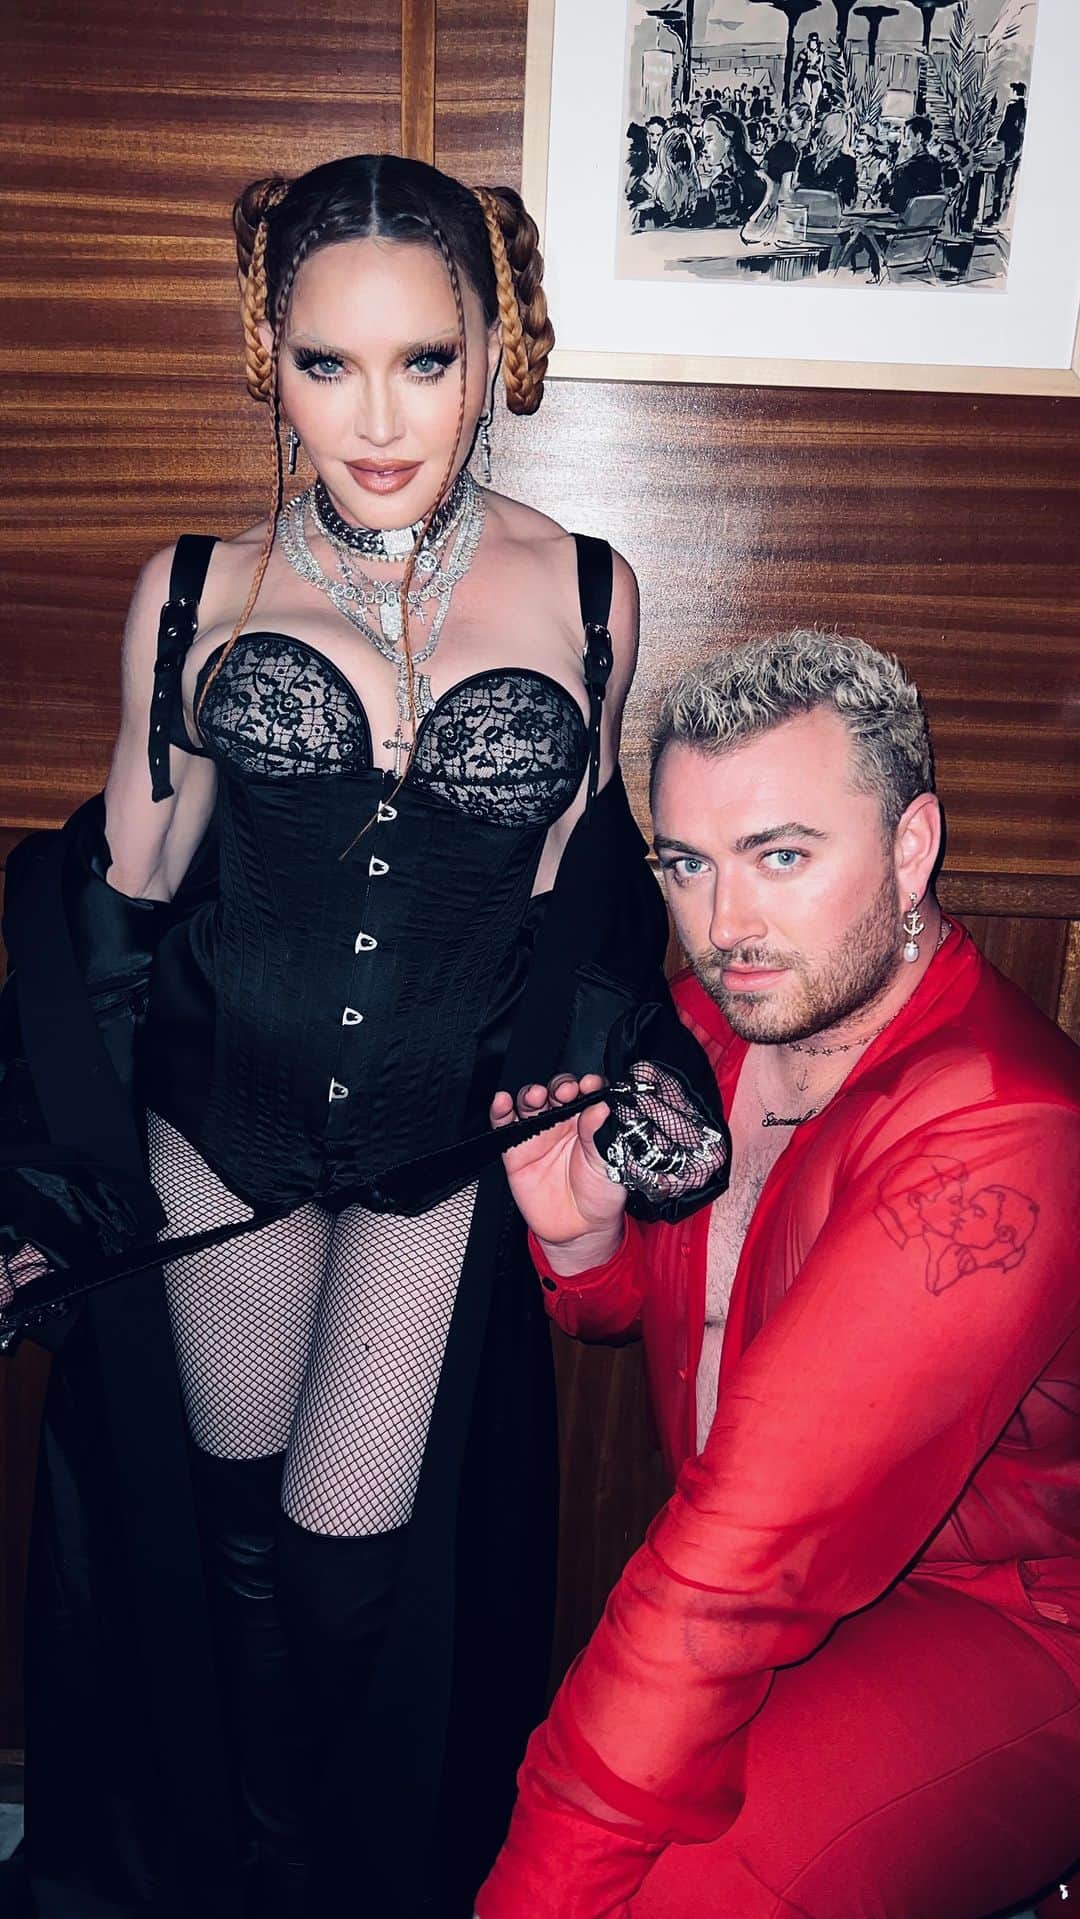 マドンナのインスタグラム：「It was an honor for me to Introduce.  Kim Petras and Sam Smith at the Grammys. I wanted to give the last award  which was Album  of the year, but I thought it was more important that I present the first trans- woman performing at the Grammys— a History  making  moment!! And on top of that she won a Grammy!! ♥️  Instead of focusing on what I said in my speech which was about giving thanks for the fearlessness of artists like Sam and Kim- Many people chose to only talk  about  Close-up photos of me Taken with a long lens camera  By a press photographer that Would distort anyone’s face!!   Once again I am caught in the glare of ageism and misogyny  That permeates  the world we live in.  A world that refuses to celebrate women past the age of 45 And feels the need to punish her If she continues to be strong willed,  hard-working  and adventurous.   I have never apologized for any of the creative choices I have made nor the way that I look or dress and I’m not going to start. I have been degraded by the media since the beginning of my career but I understand that this is all a test and I am happy to do the trailblazing  so that all the women behind me can have an easier time in the years to come.  In the words of Beyonce “ You-won’t break my soul”,   I look forward to many more years of subversive behavior -pushing boundaries-Standing up to the patriarchy -and Most of all enjoying my life.   Bow down bitches! 💃🏼🪩🎤💄🎼👠」